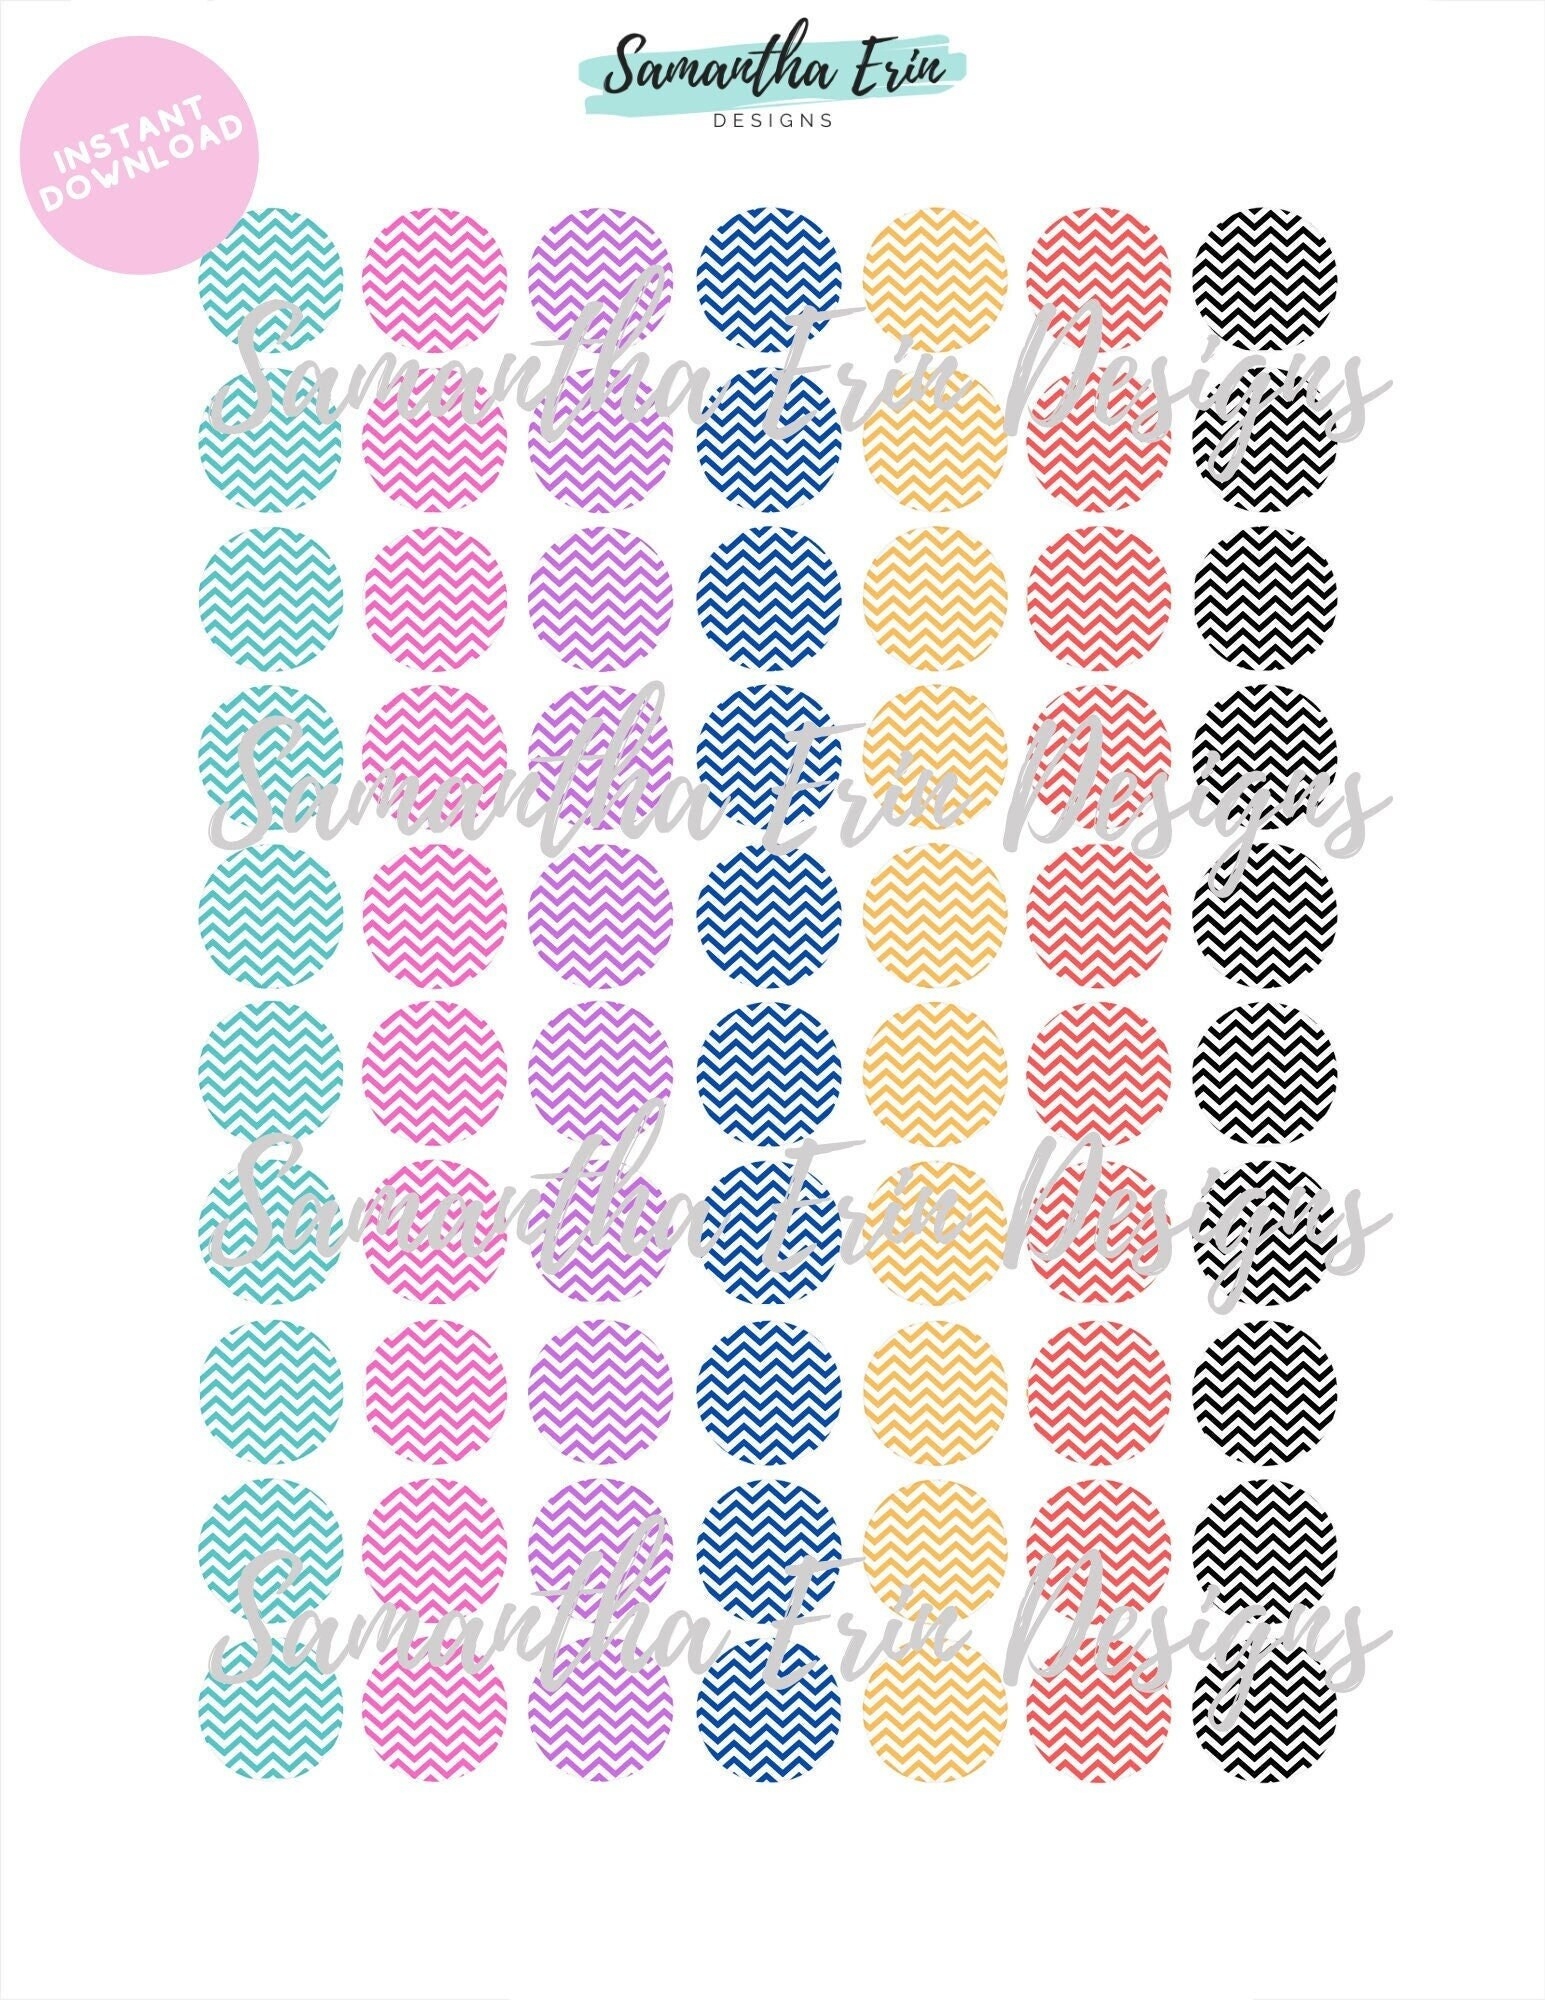 20mm Chevron Cabochon Template Instant Download 20mm Circle Templates 20mm Cabochons 20mm Templates Etsy - Free Printable Cabochon Templates